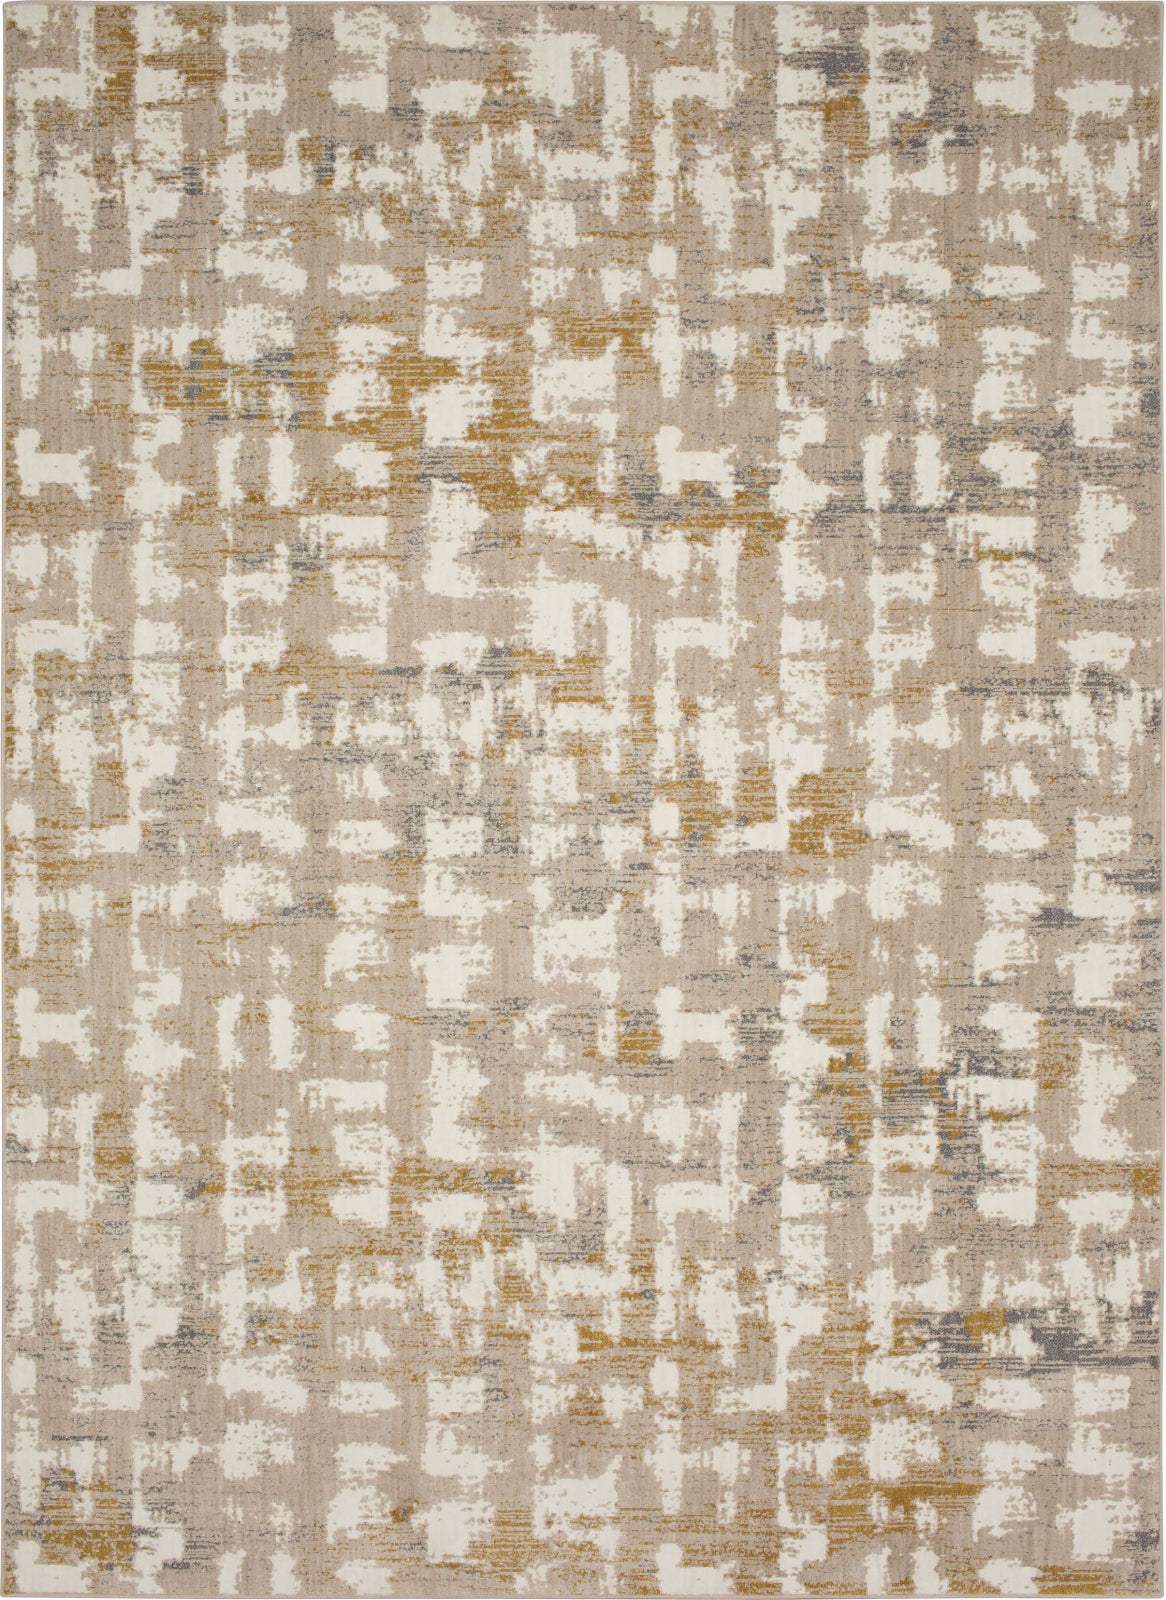 Karastan Rendition Abydos Oyster Area Rug by Stacy Garcia Main Image